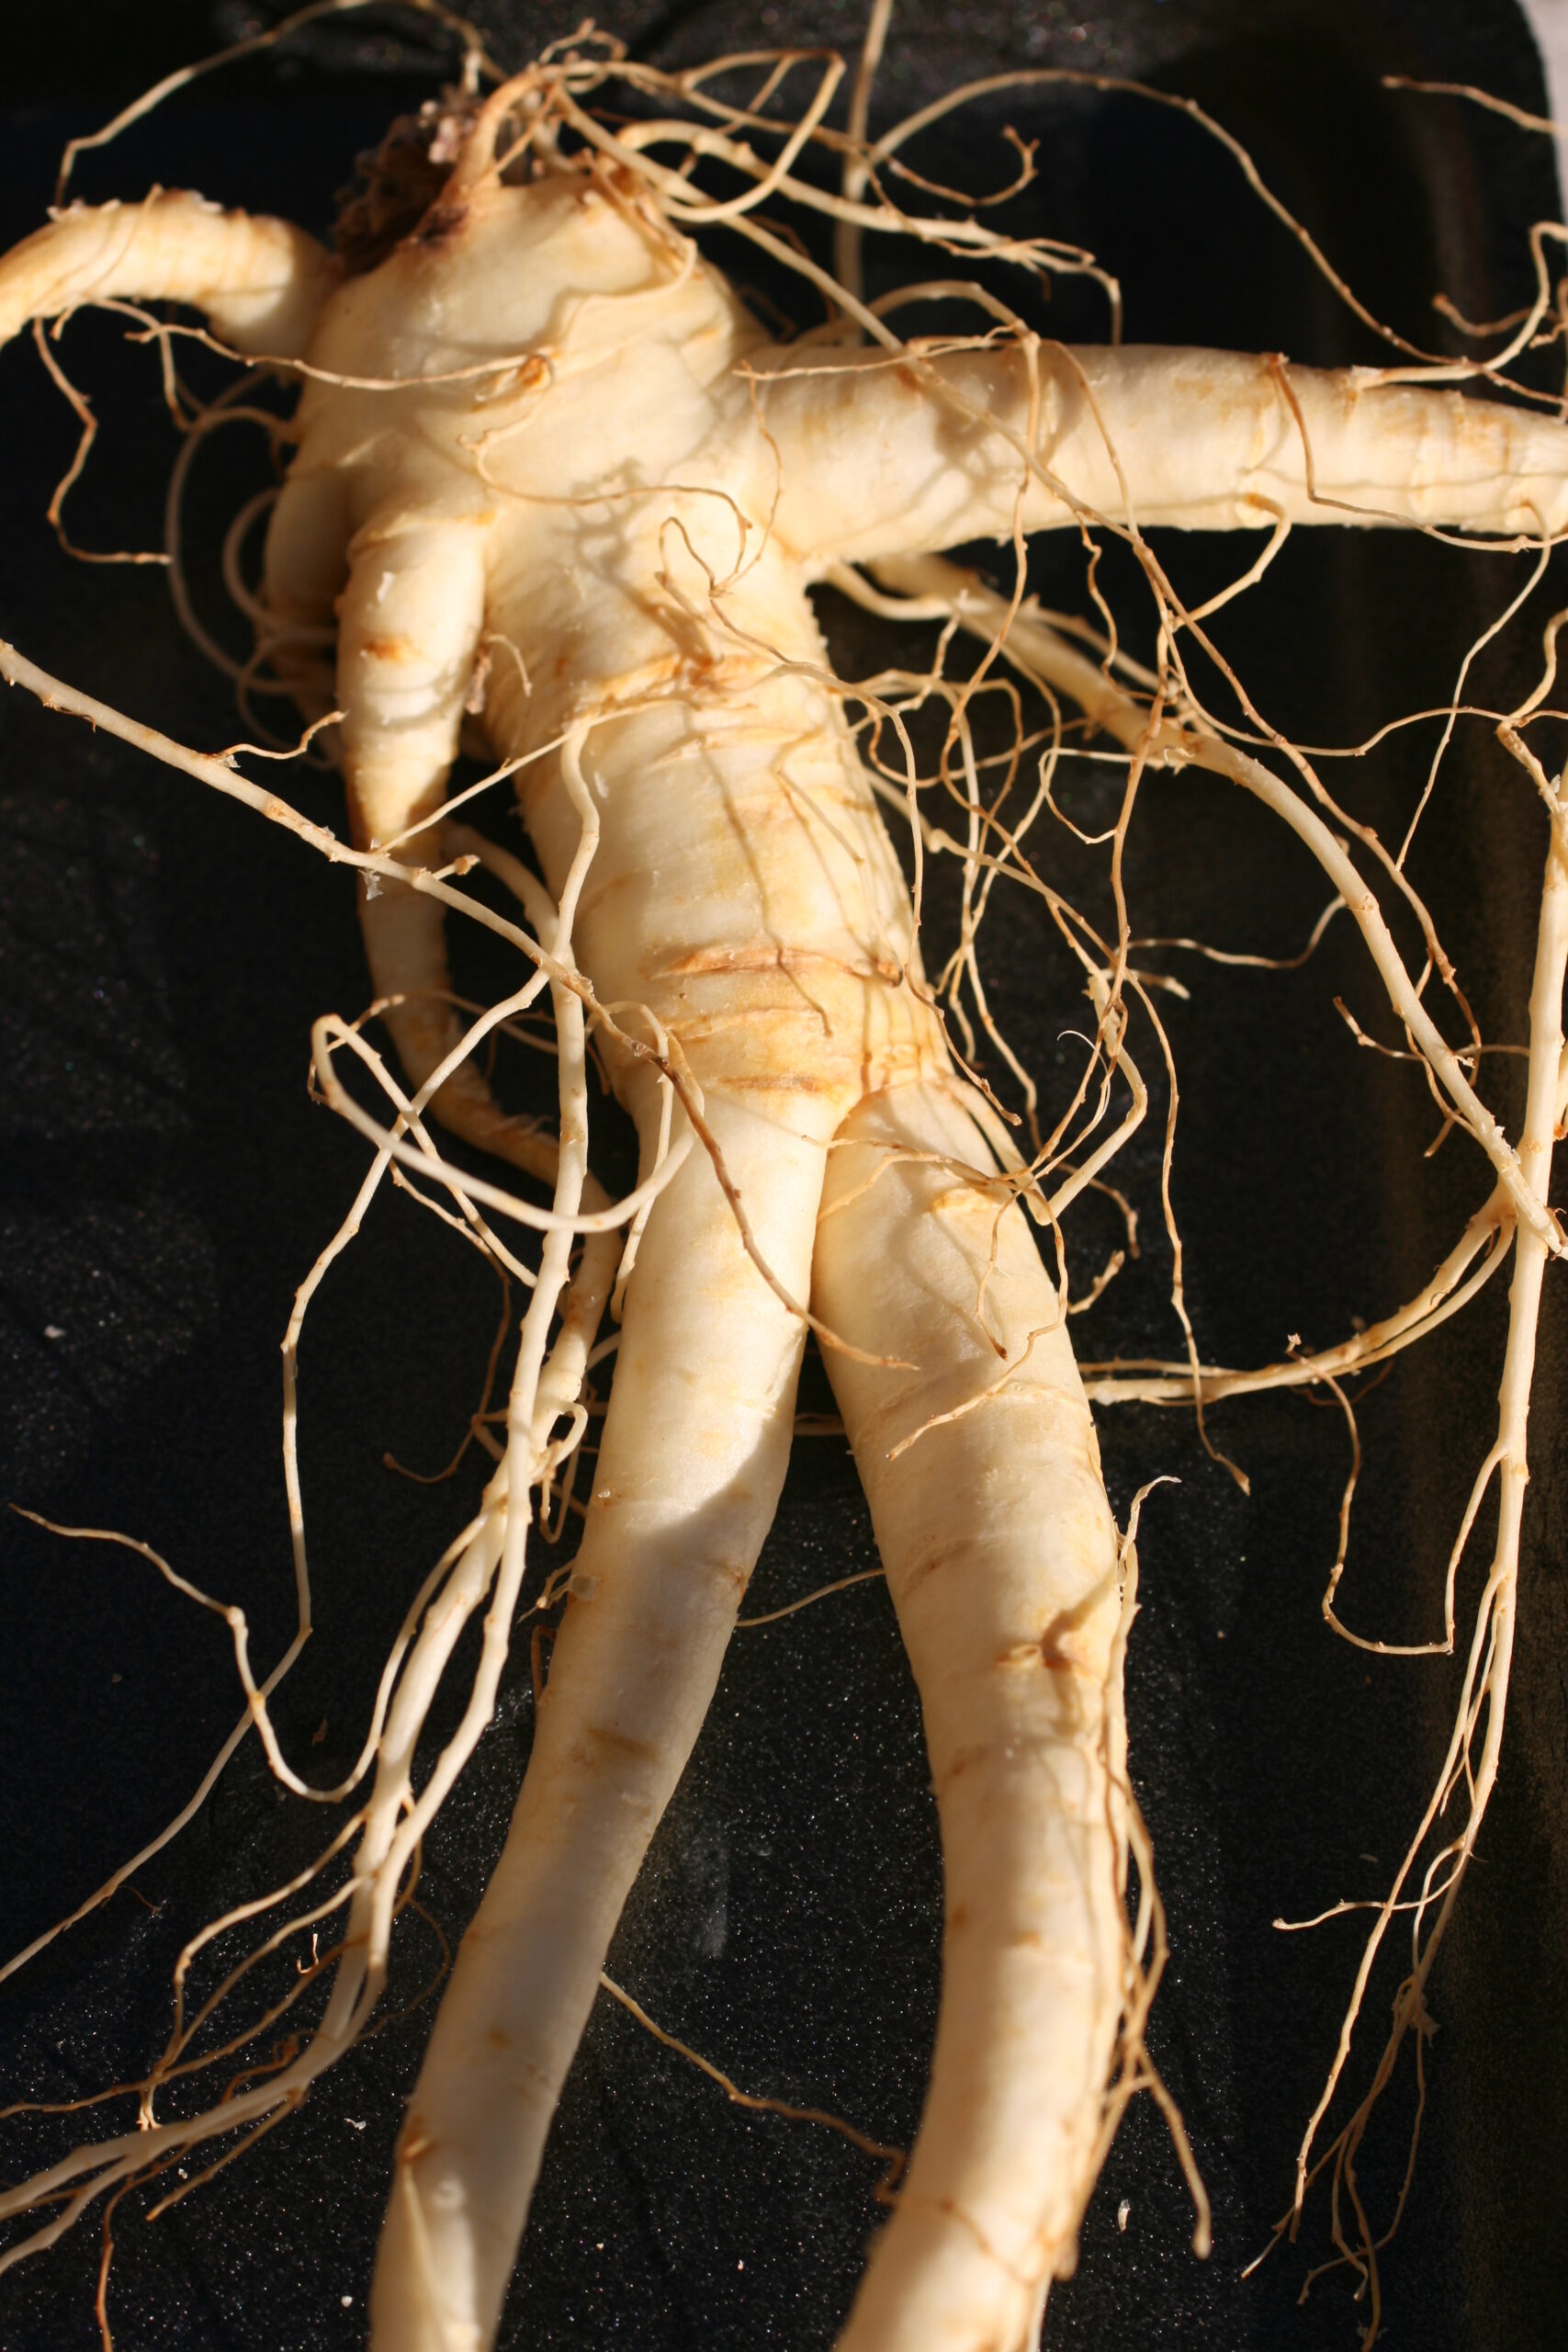 ginseng helps with disease related fatigue